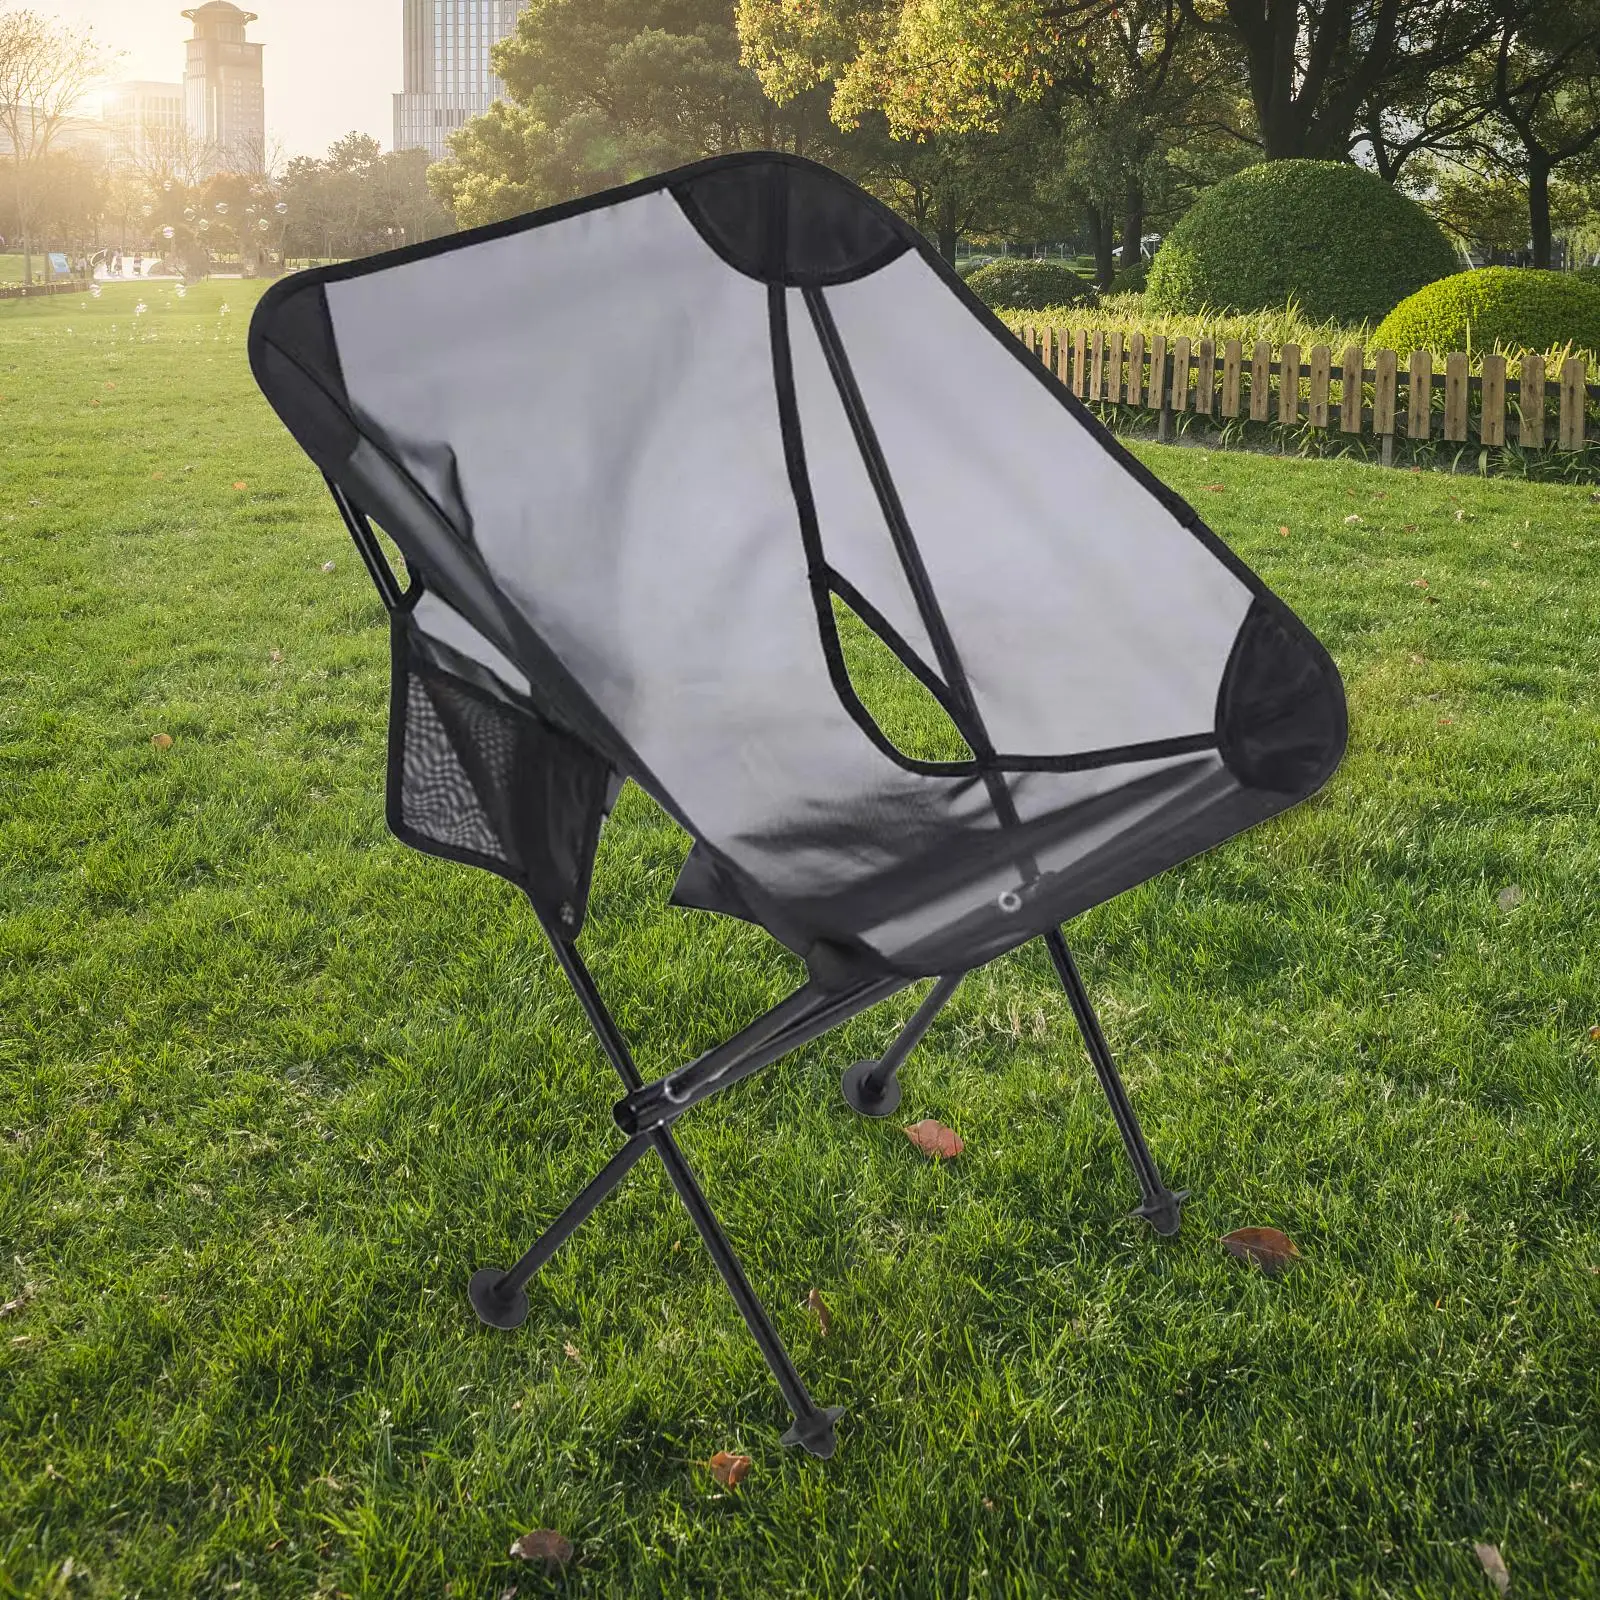 Folding Camping Chair Outdoor Moon Chair for Outdoor Gardens Fishing Backpacking Campings Accessory Beach Chair Folding Chair